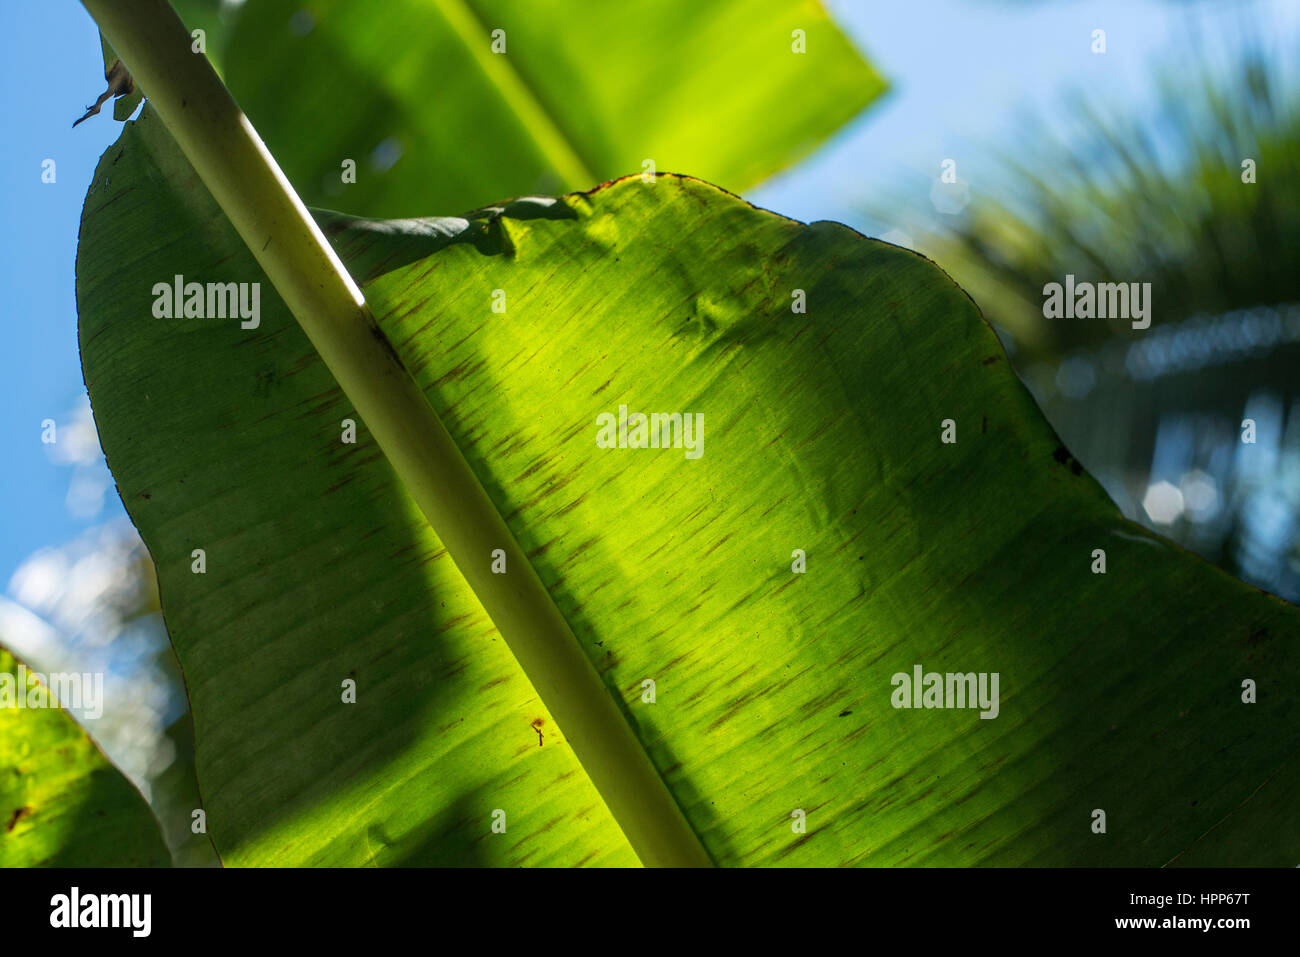 relaxing view over banana leaves Stock Photo